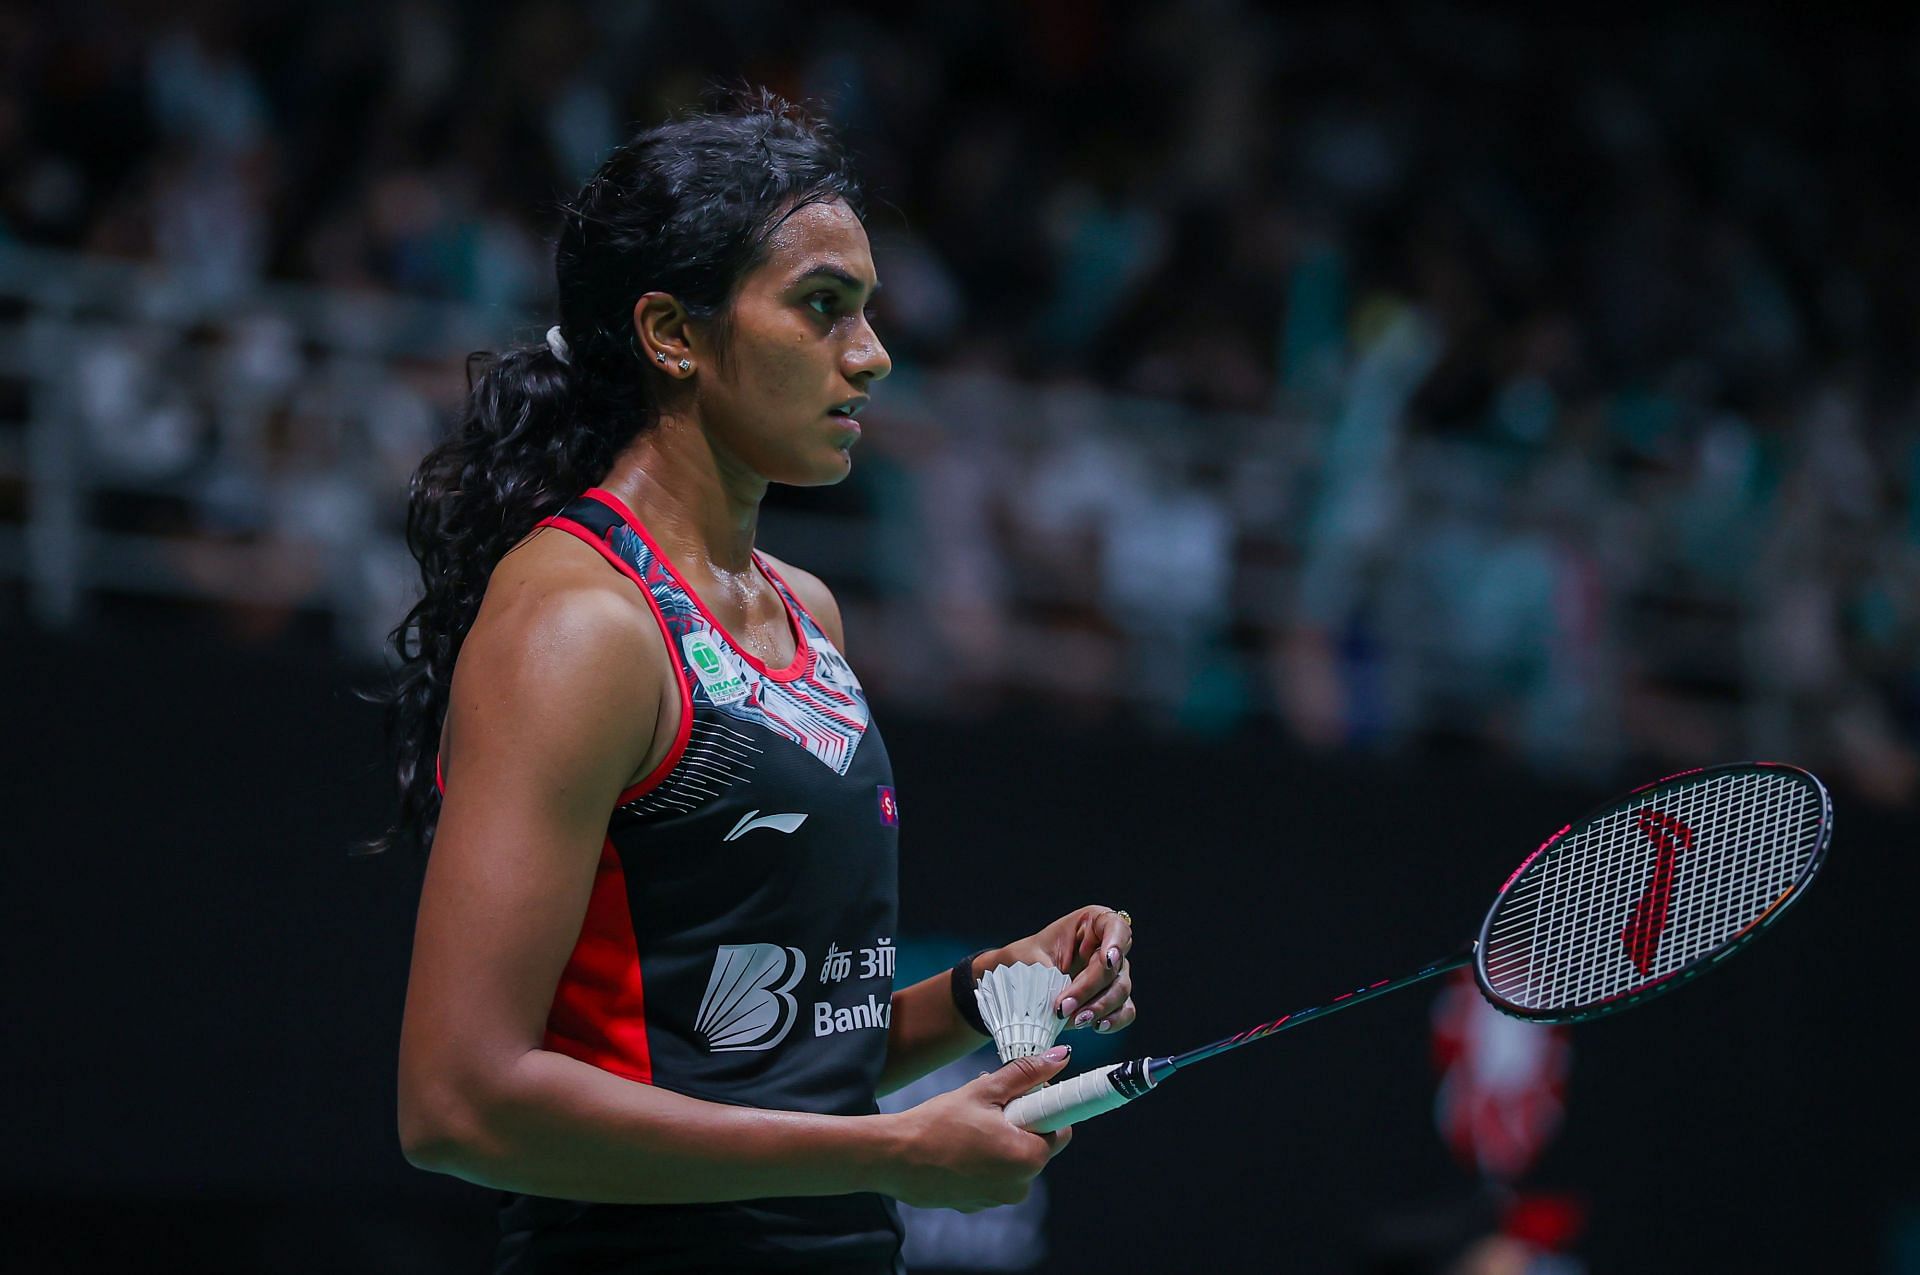 Singapore Open 2022 PV Sindhu vs Lianne Tan preview, head-to-head, prediction and live streaming details